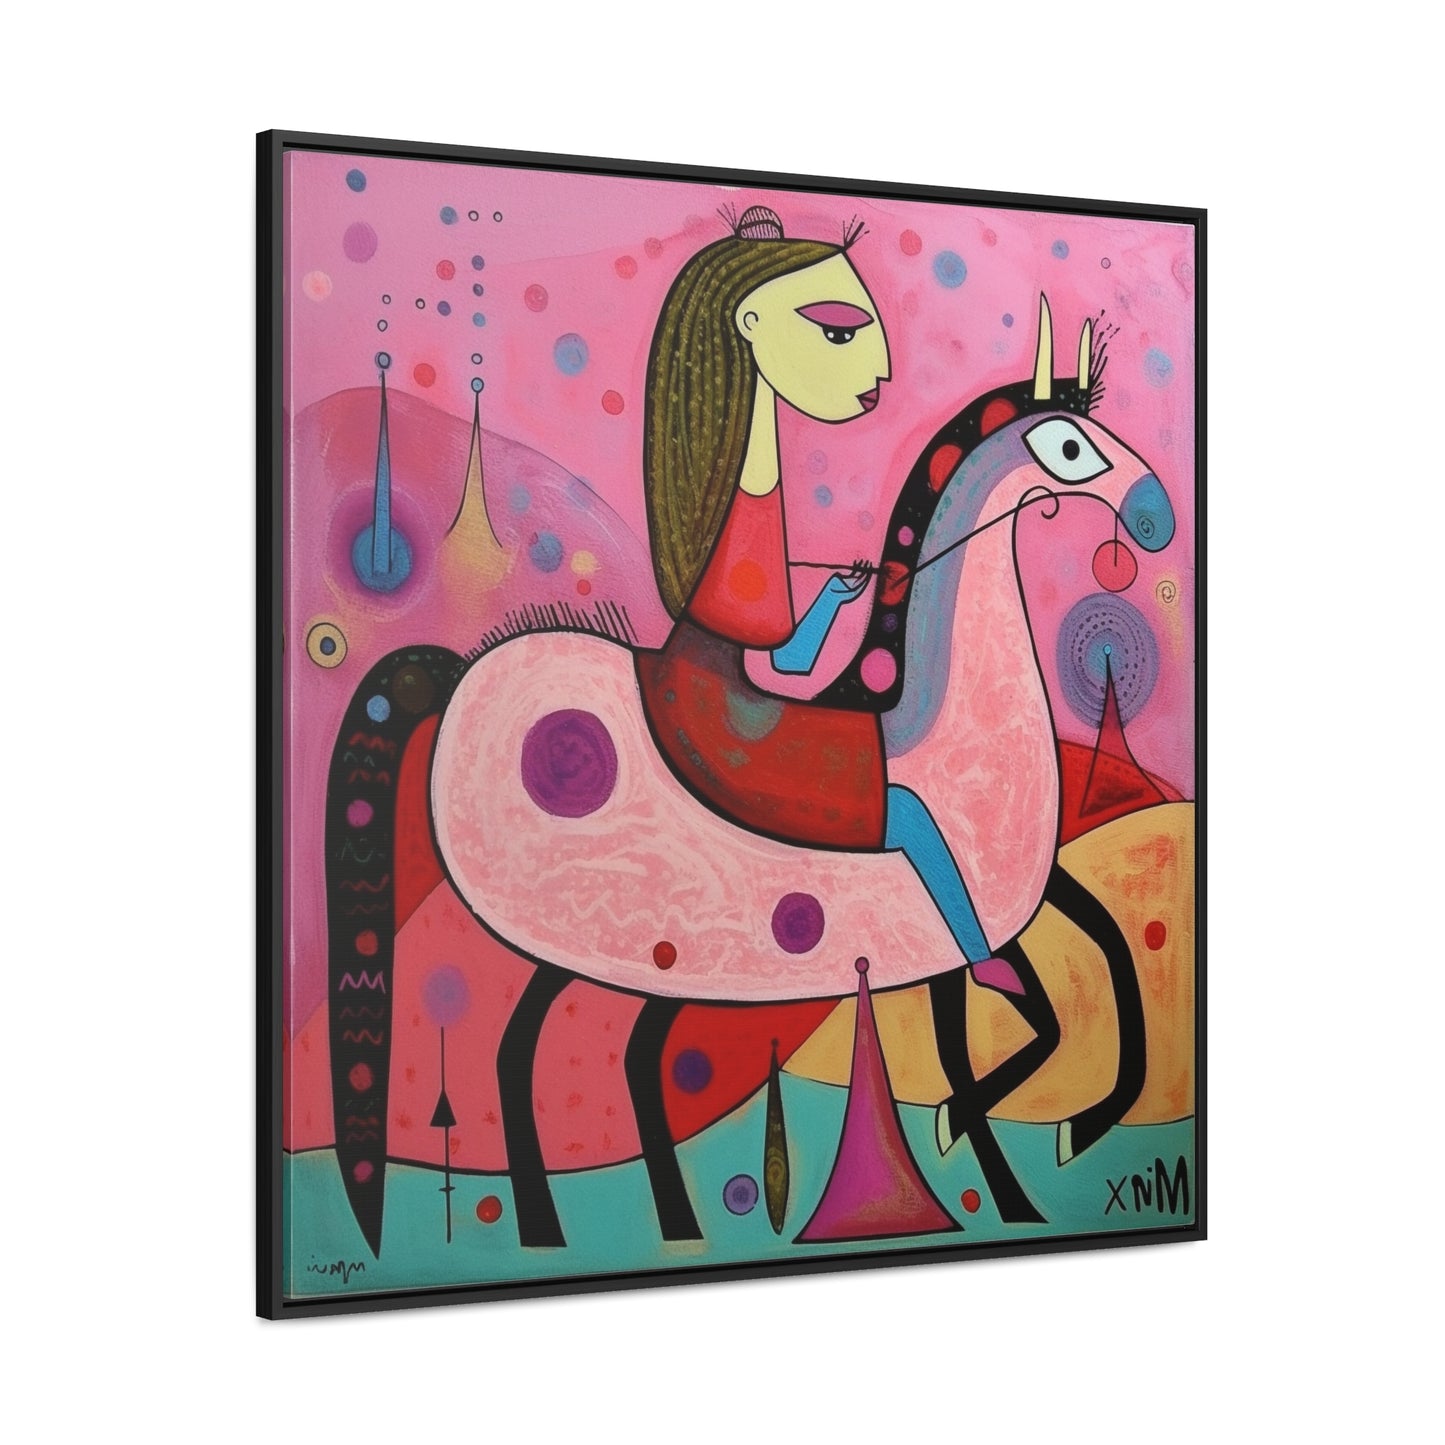 The Dreams of the Child 57, Gallery Canvas Wraps, Square Frame